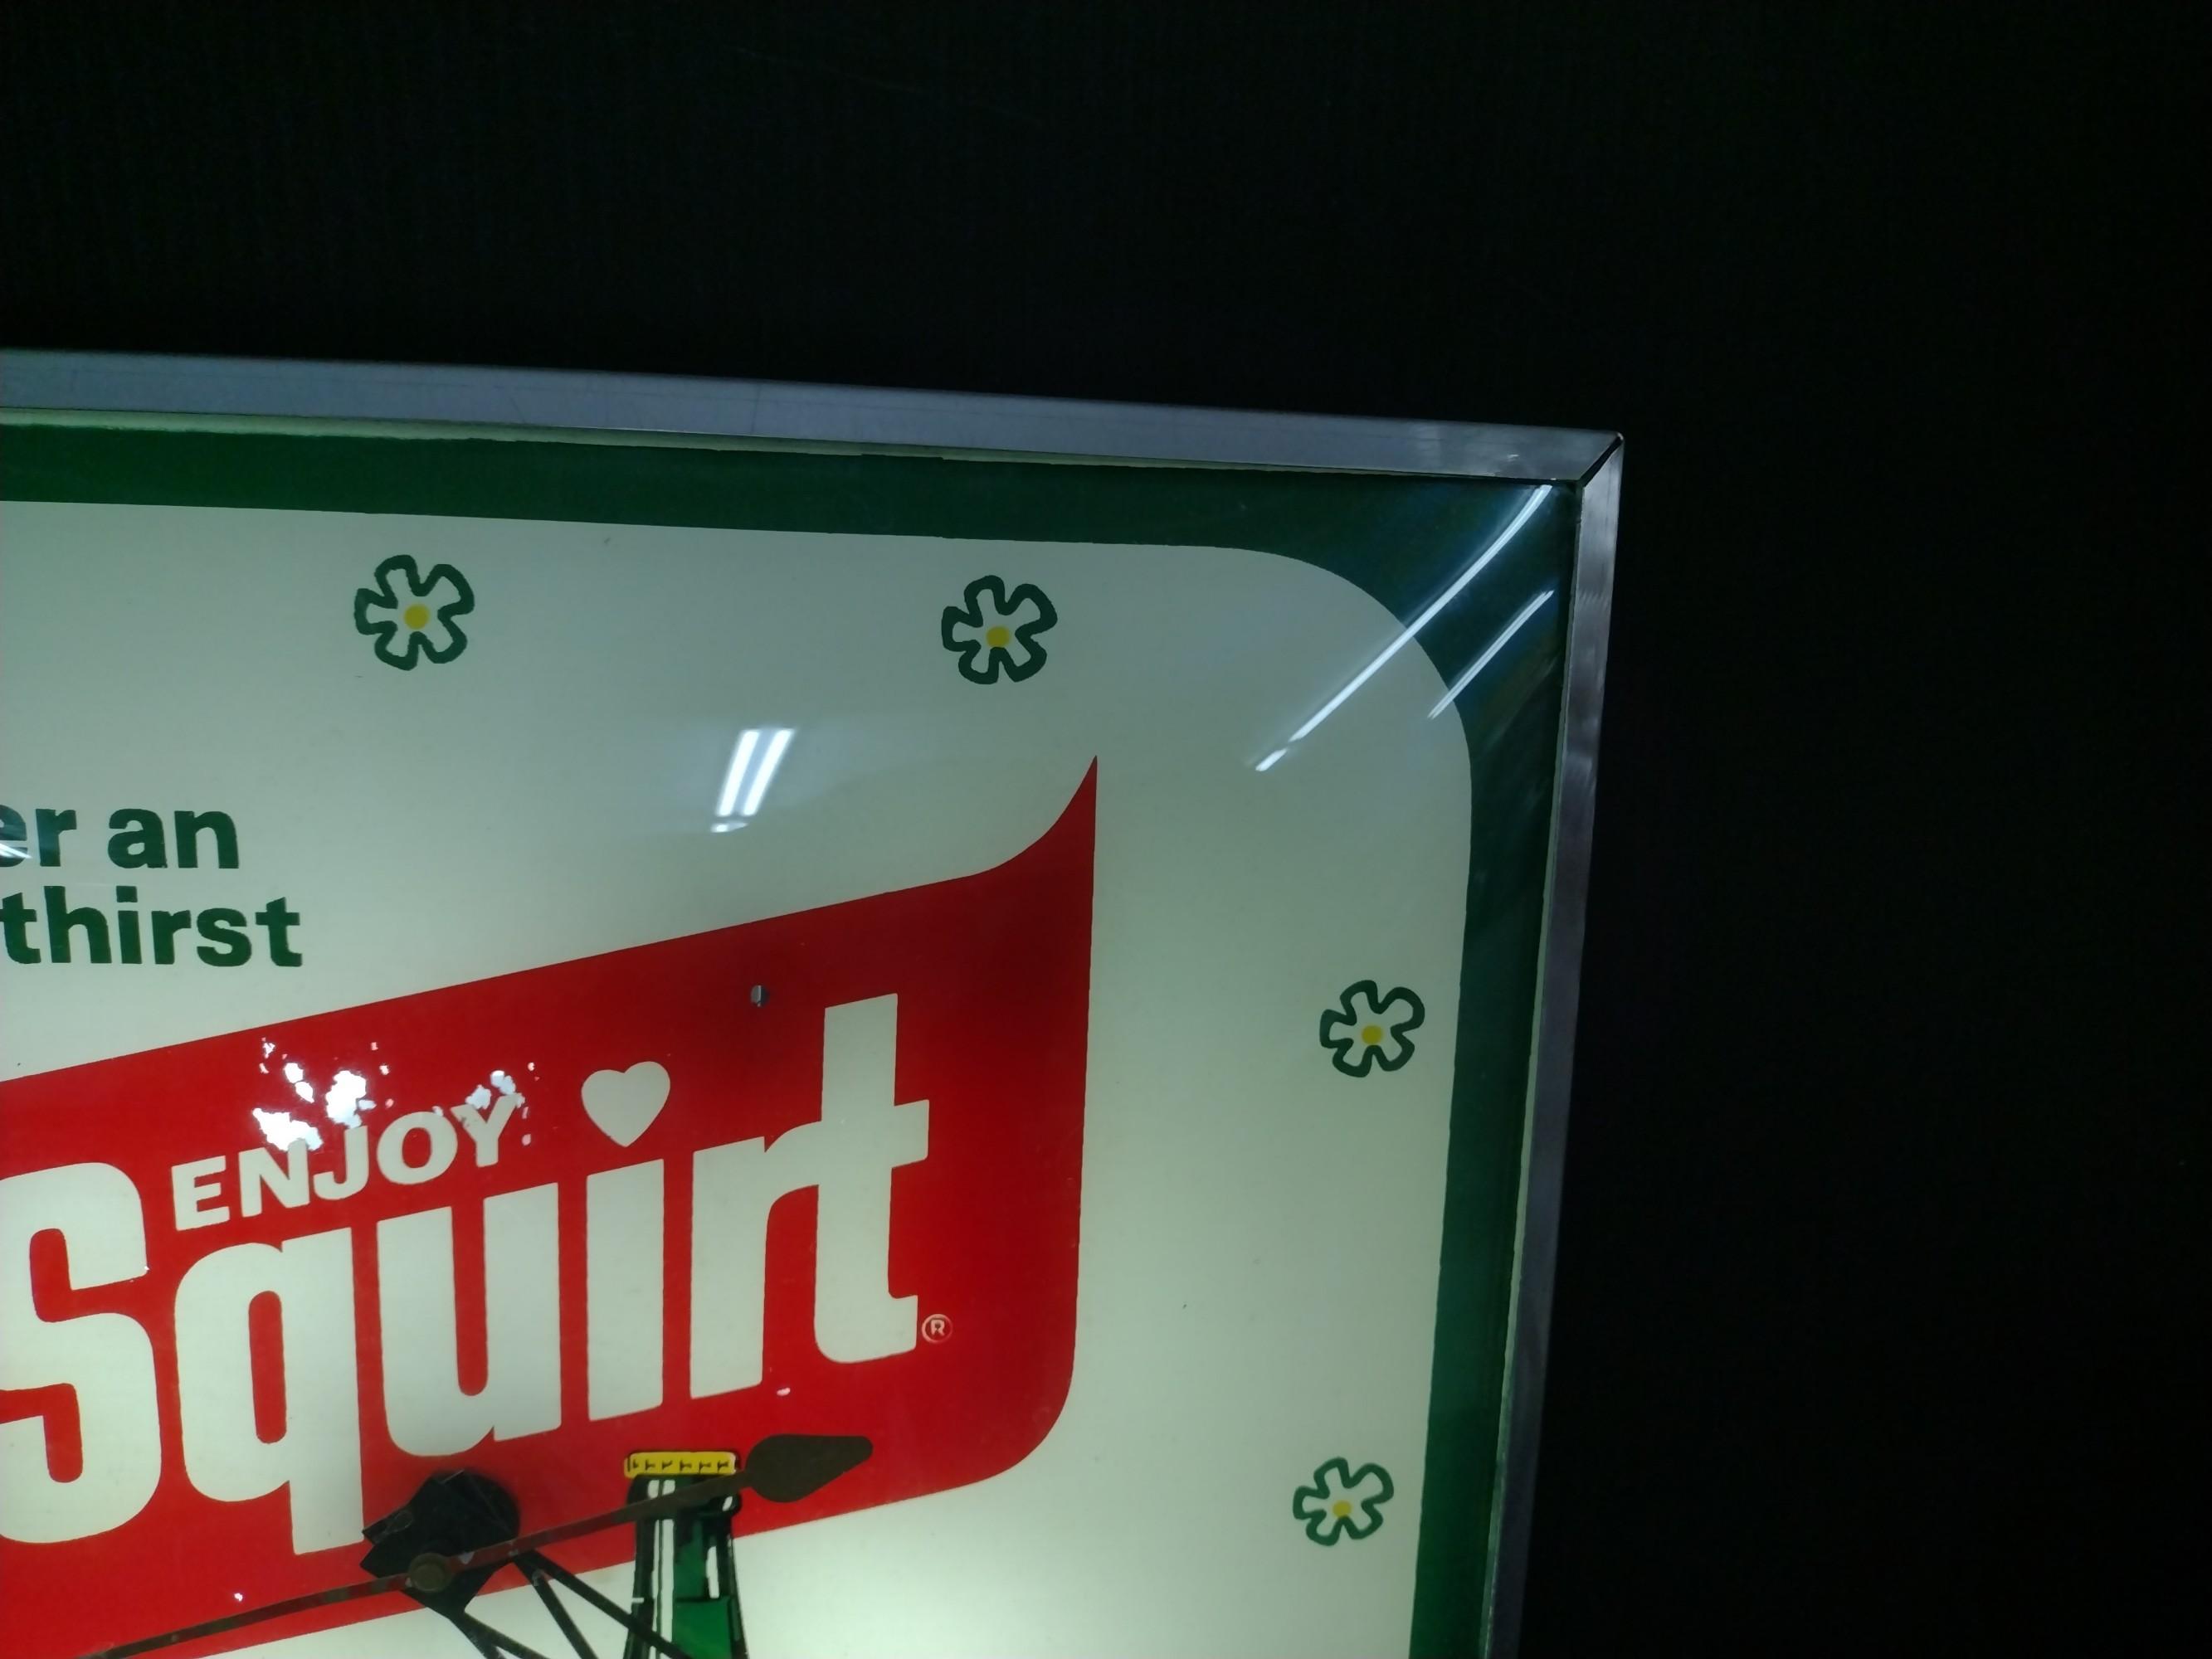 PAM Squirt Soda Lighted Advertising Clock